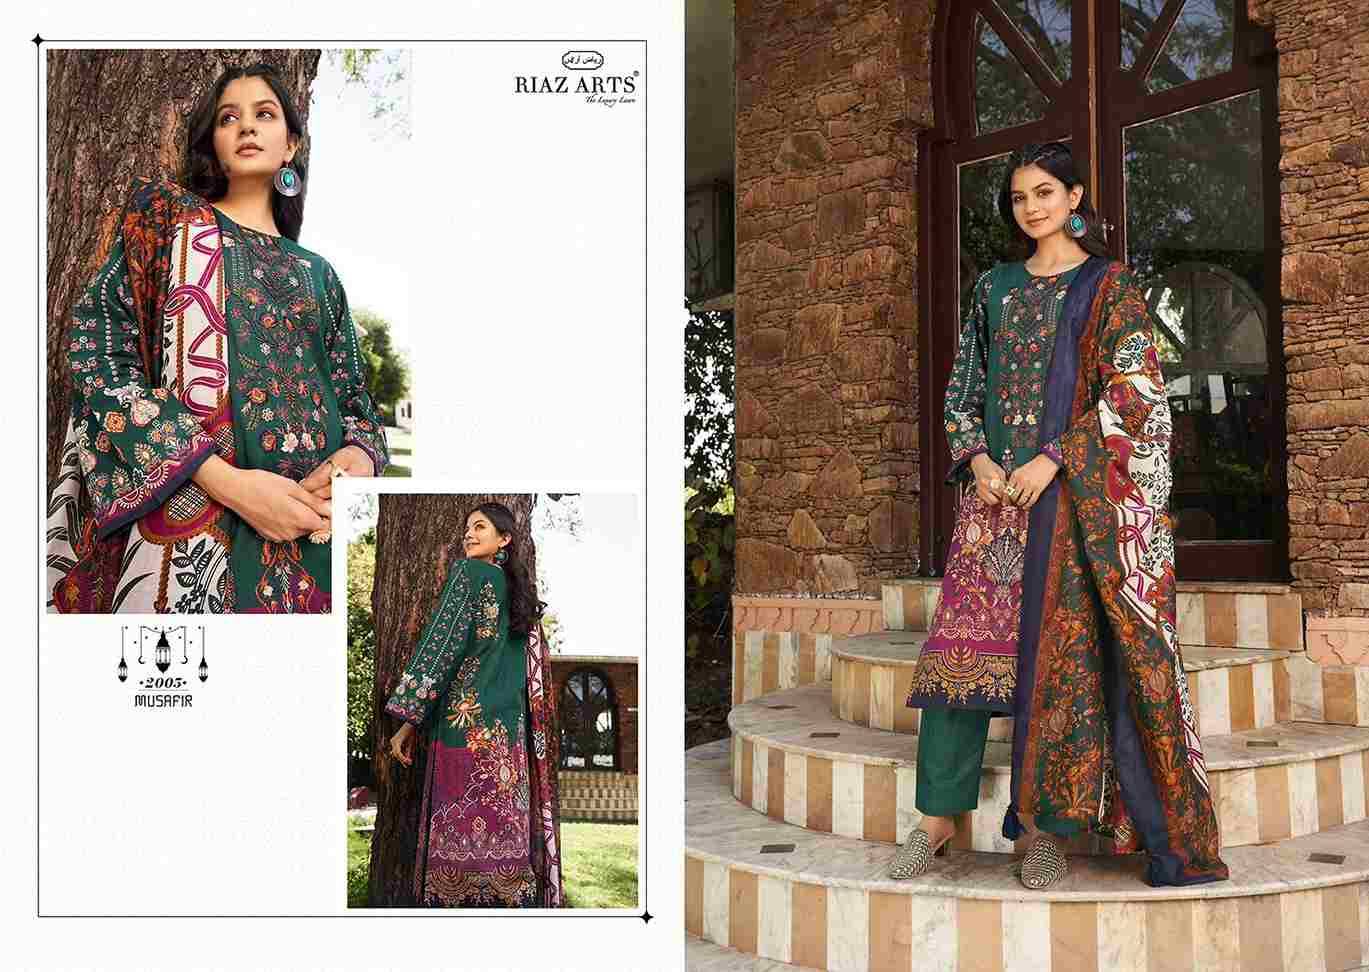 Musafir By Riaz Arts 2001 To 2008 Series Indian Traditional Wear Collection Beautiful Stylish Fancy Colorful Party Wear & Wear Pure Lawn Print Dress At Wholesale Price